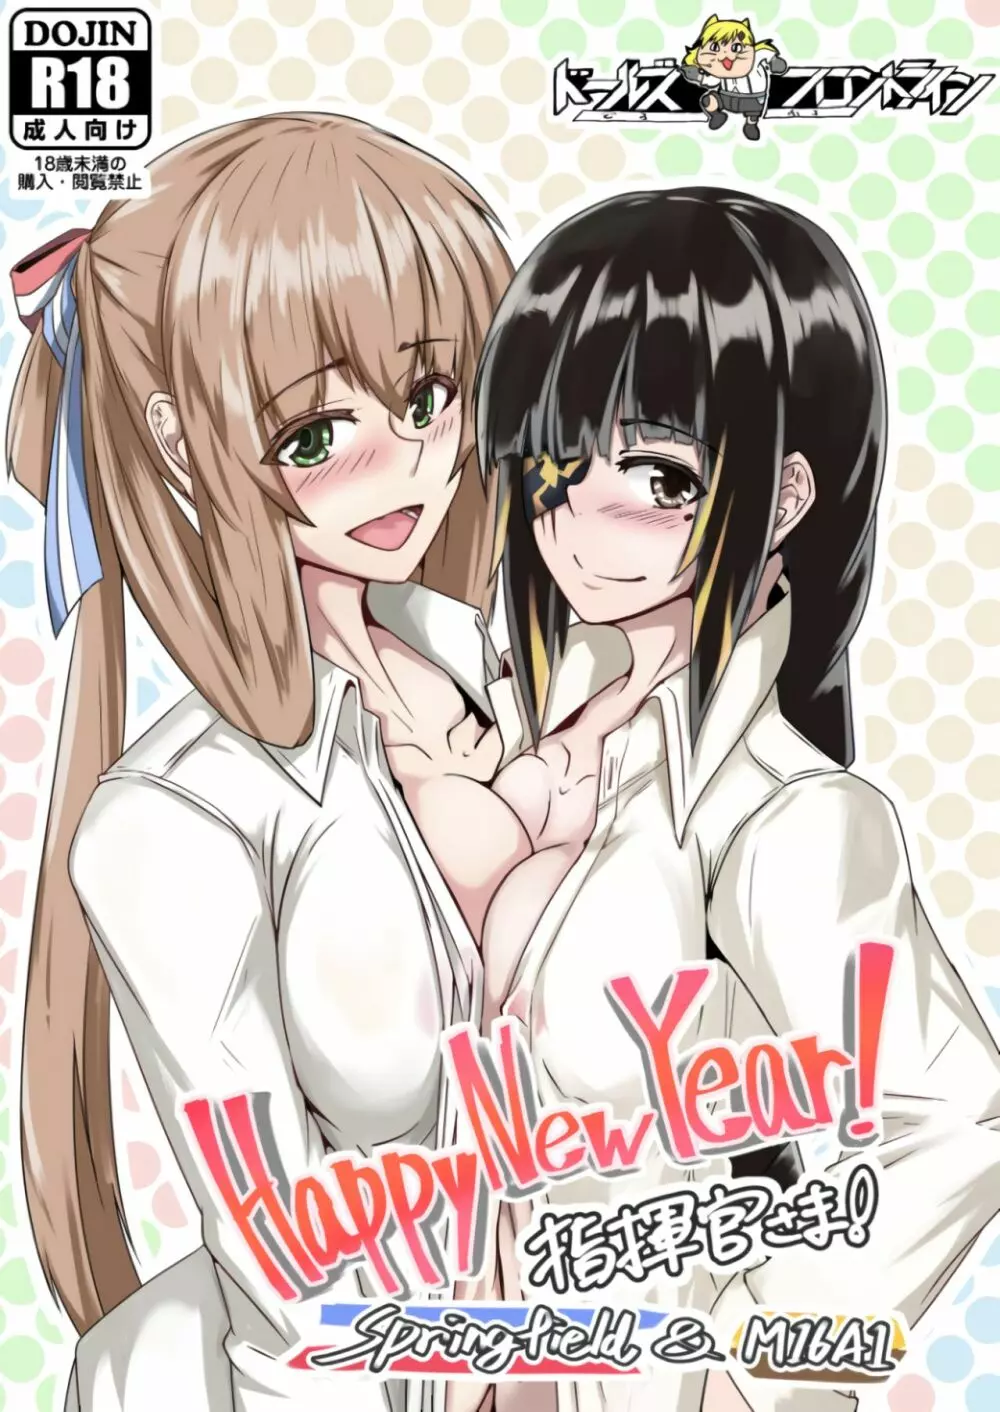 Happy New Year! 指揮官さま! Springfield&M16A1 Page.1